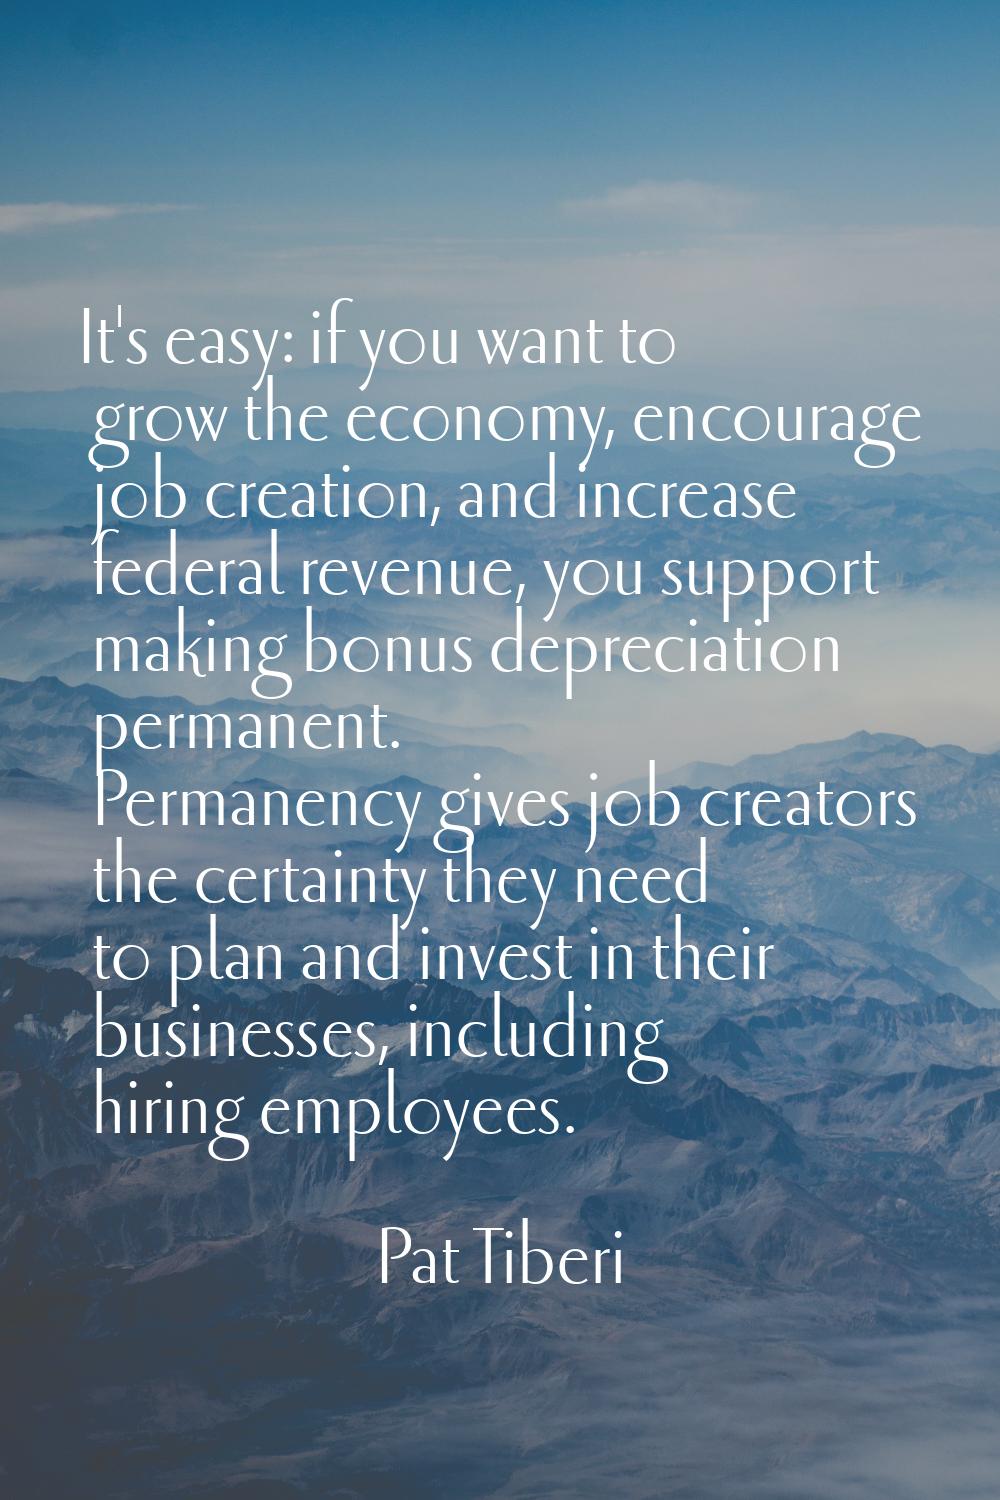 It's easy: if you want to grow the economy, encourage job creation, and increase federal revenue, y